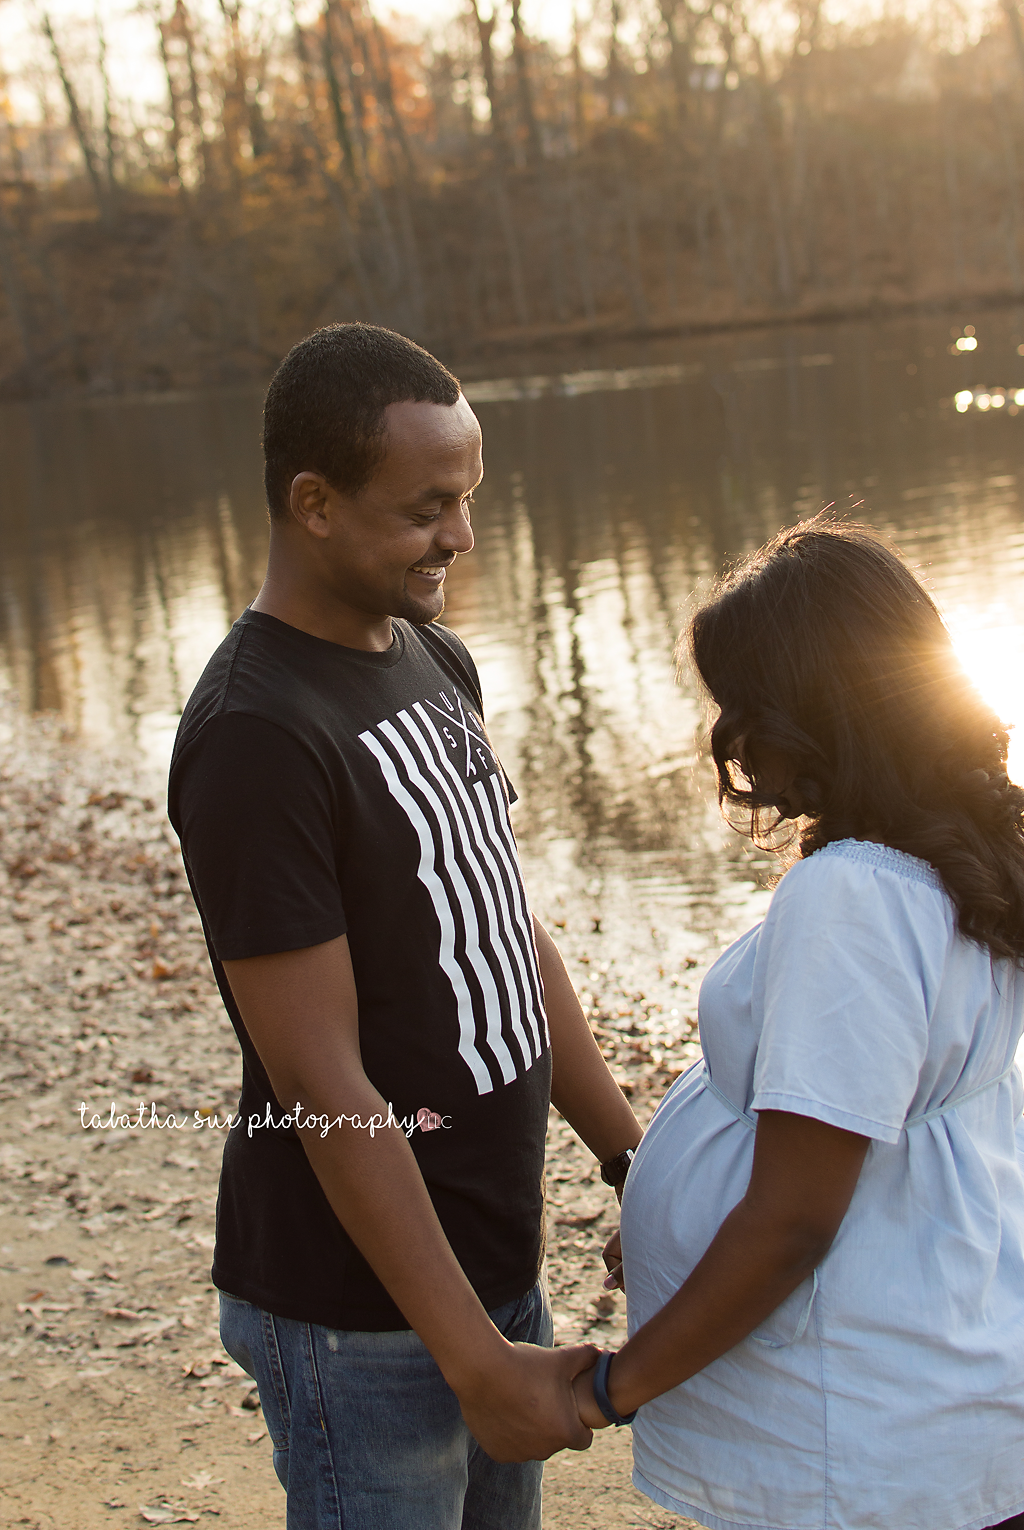 maternity-photographer-near-cleveland-ohio-maternity-session-at-lake-wallace-in-berea-ohio-pregnancy-pictures-near-the-water-the-love-in-his-eyes-professional-photographer.png